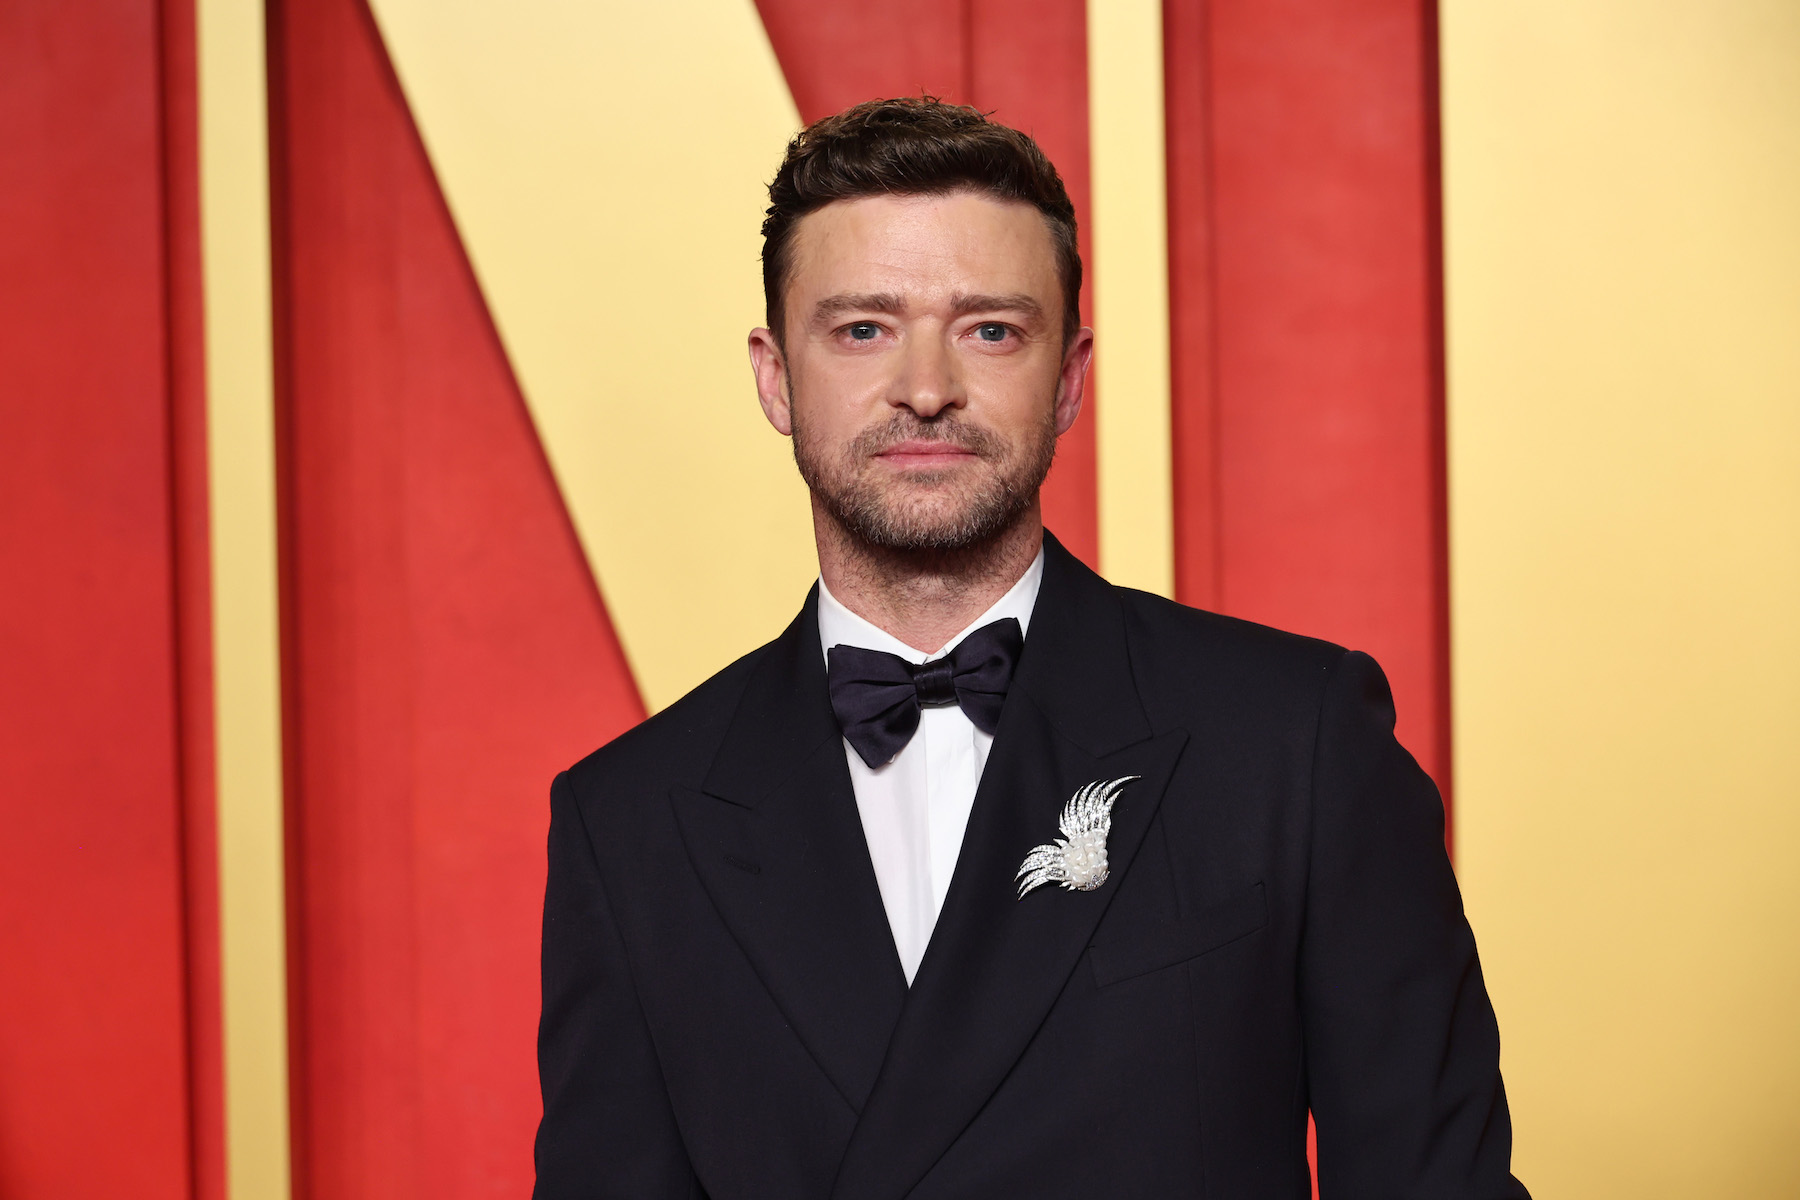 Justin Timberlake’s Lawyer Claims He Wasn’t Drunk and ‘Should Not Have Been Arrested for DWI’